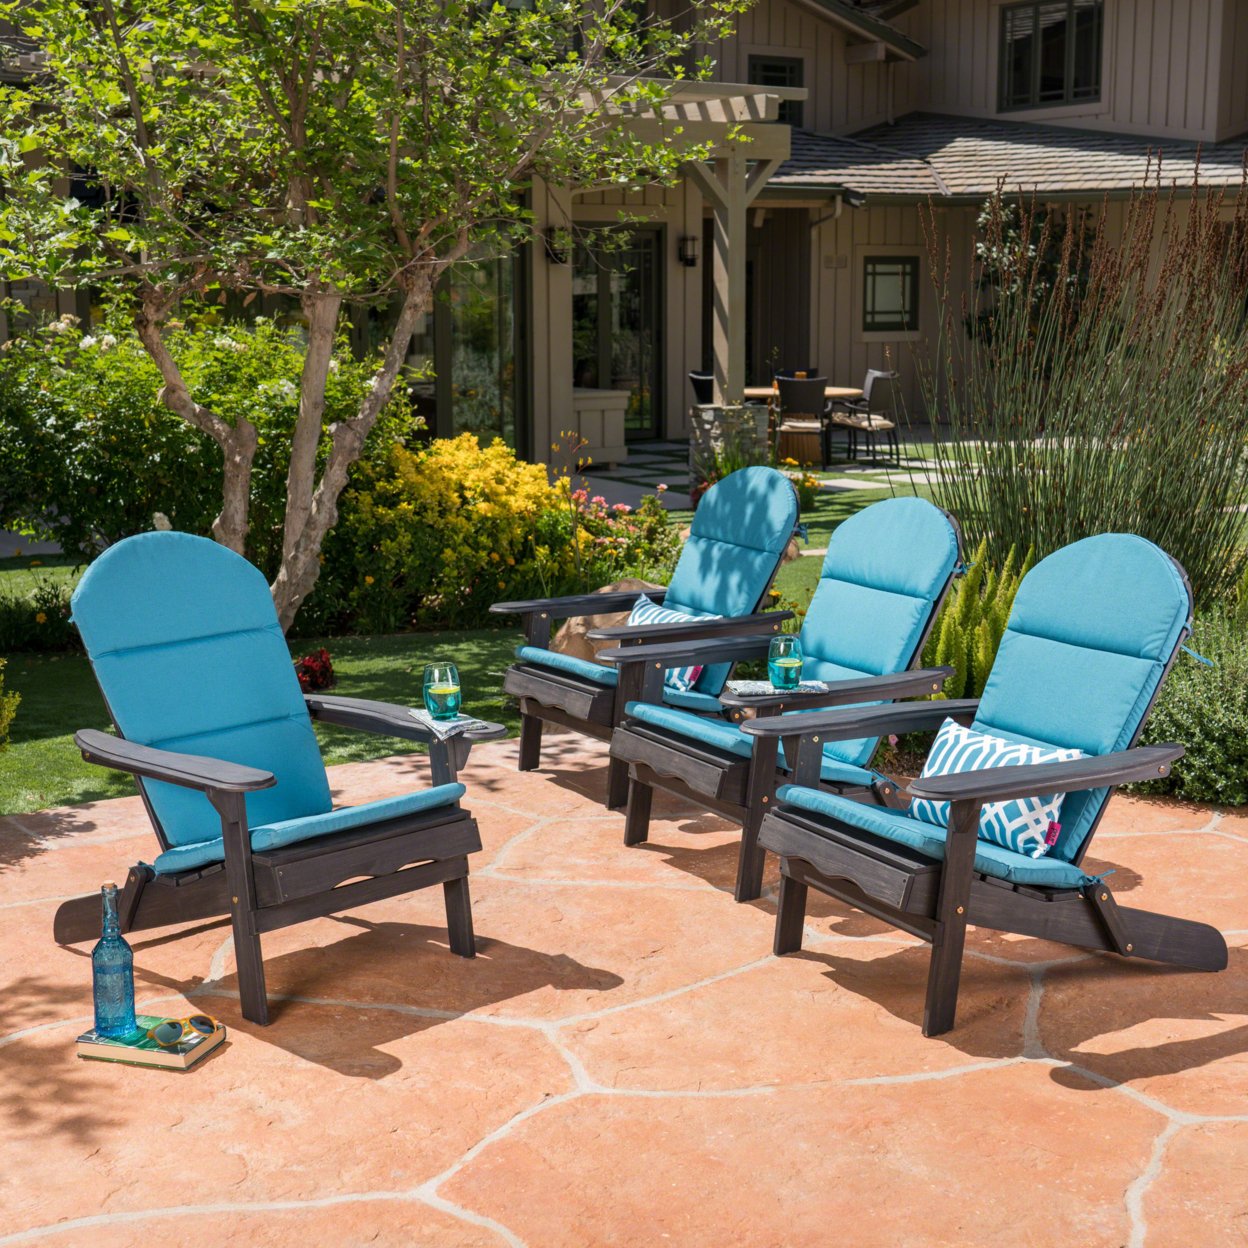 Nelie Outdoor Acacia Wood Adirondack Chairs With Cushions - Navy Blue, Set Of 4